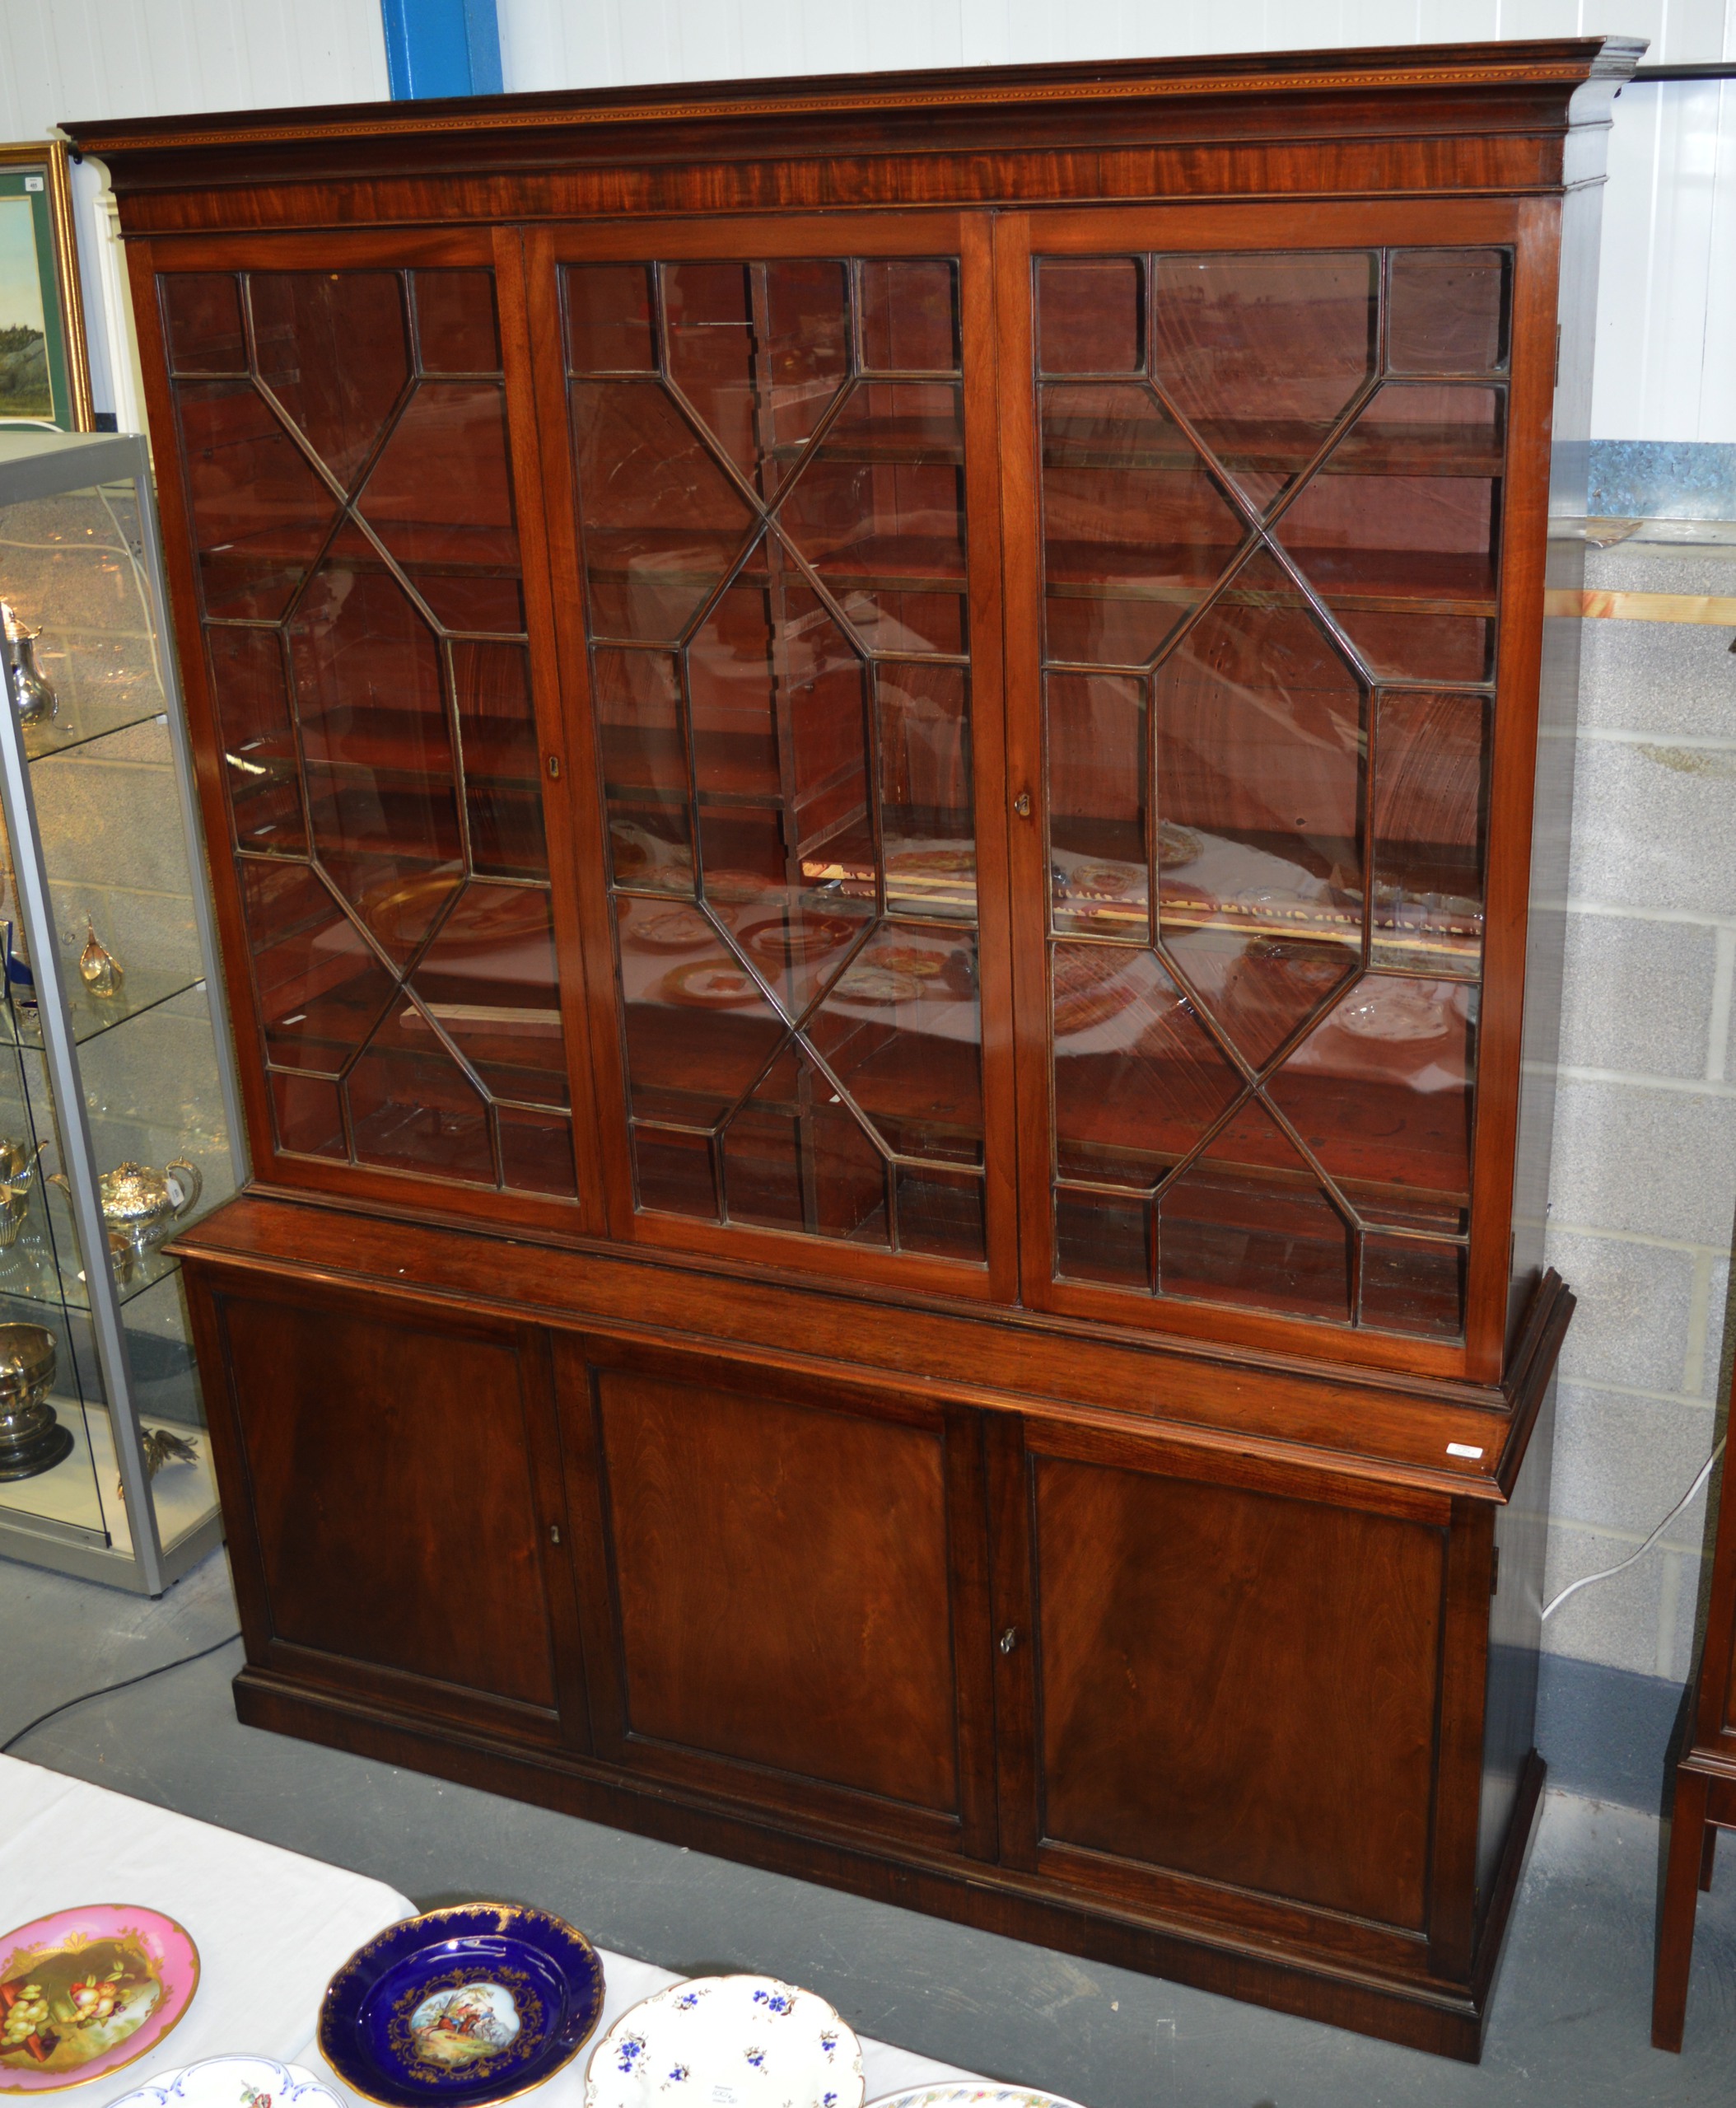 A VERY LARGE GEORGE III MAHOGANY DISPLAY CASE with glass doors and base with cupboard doors. 6Ft